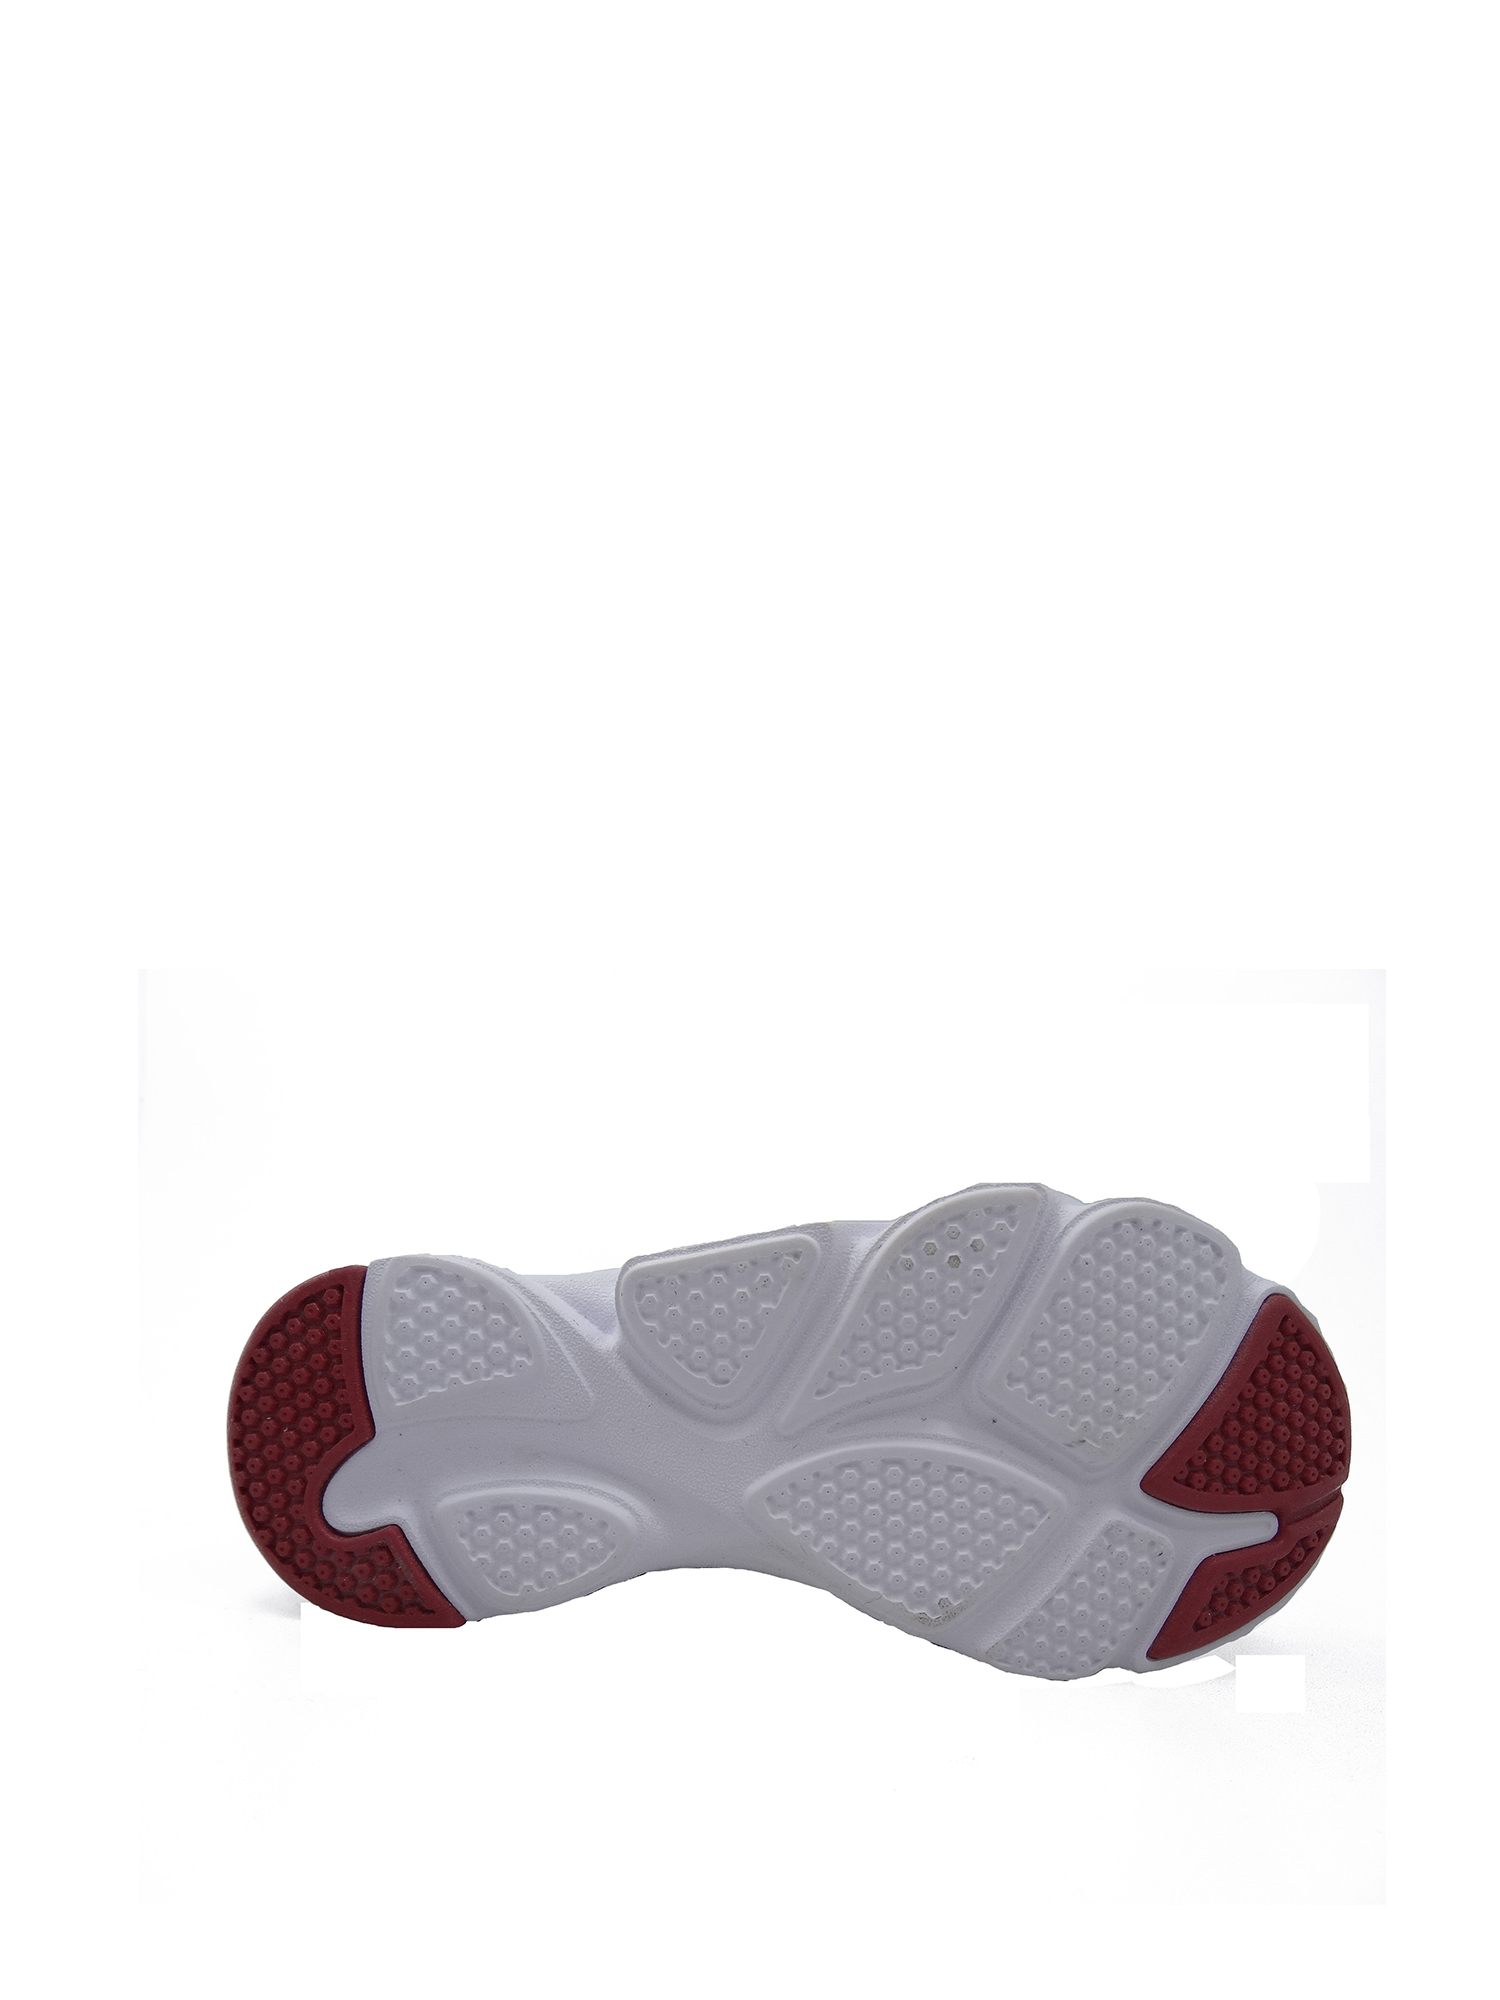 Boy's Lightweight Knit Athletic Shoe - image 2 of 5